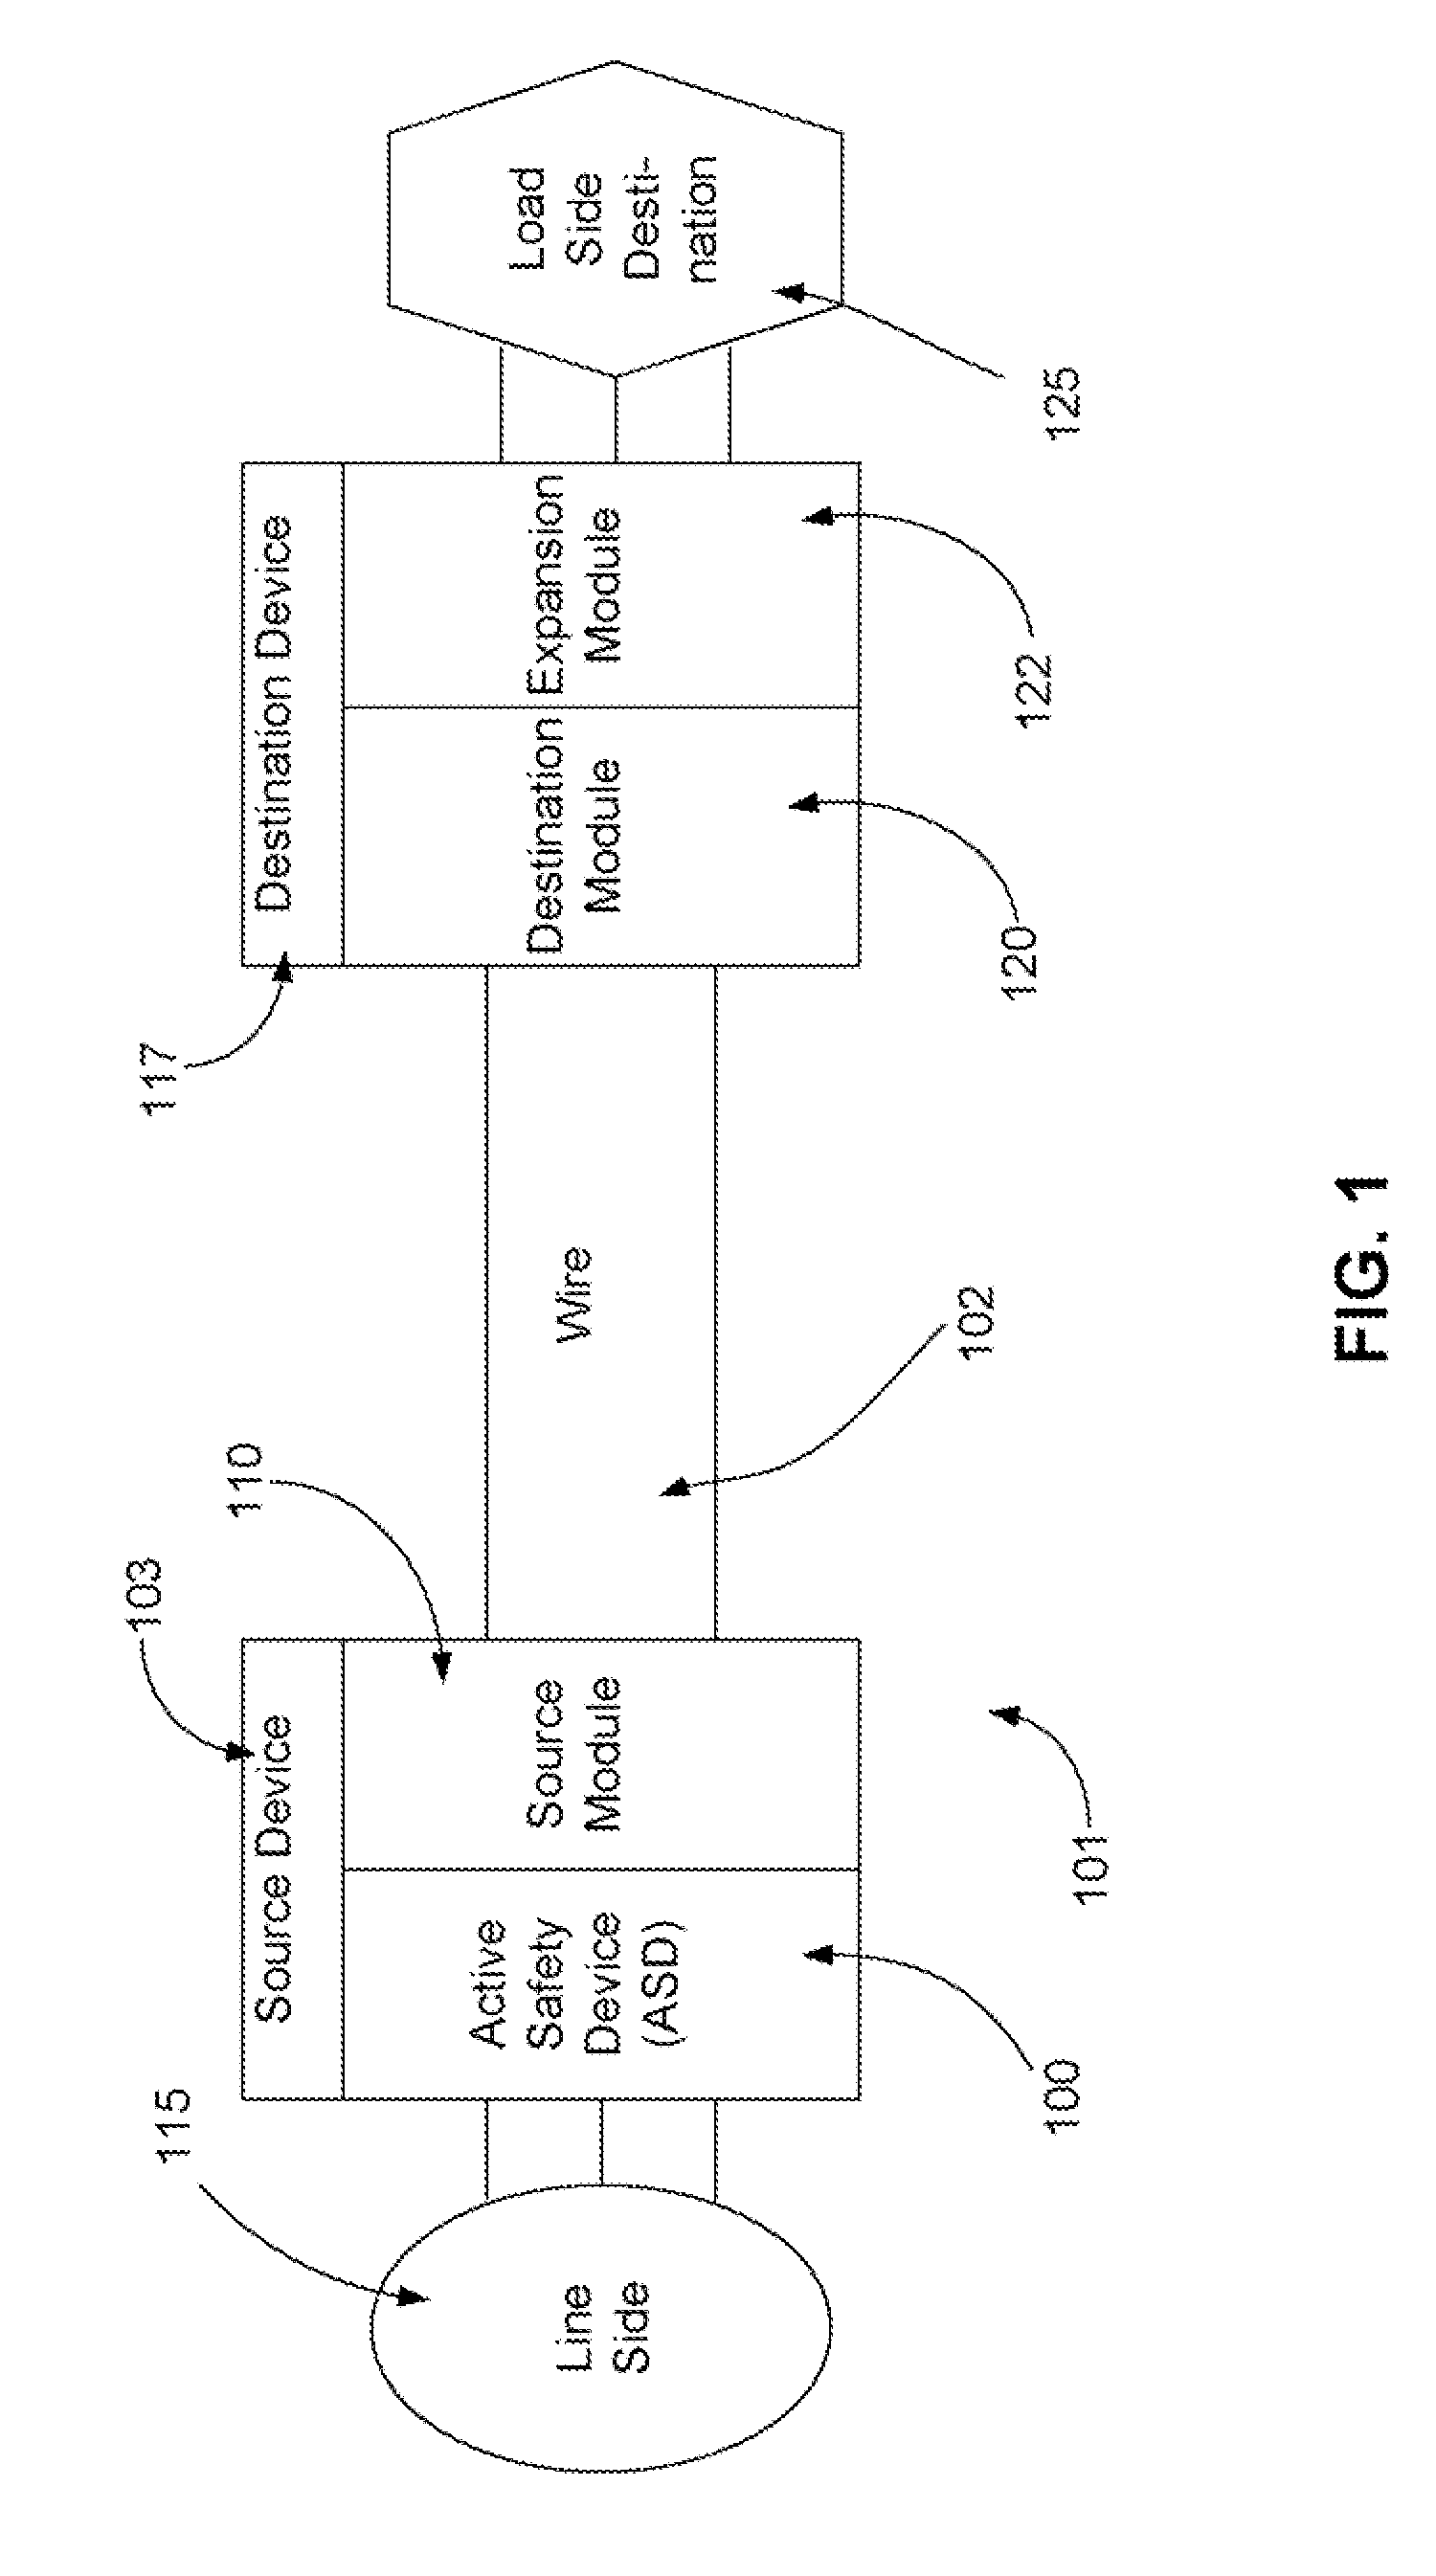 Electrical safety devices and systems for use with electrical wiring, and methods for using same